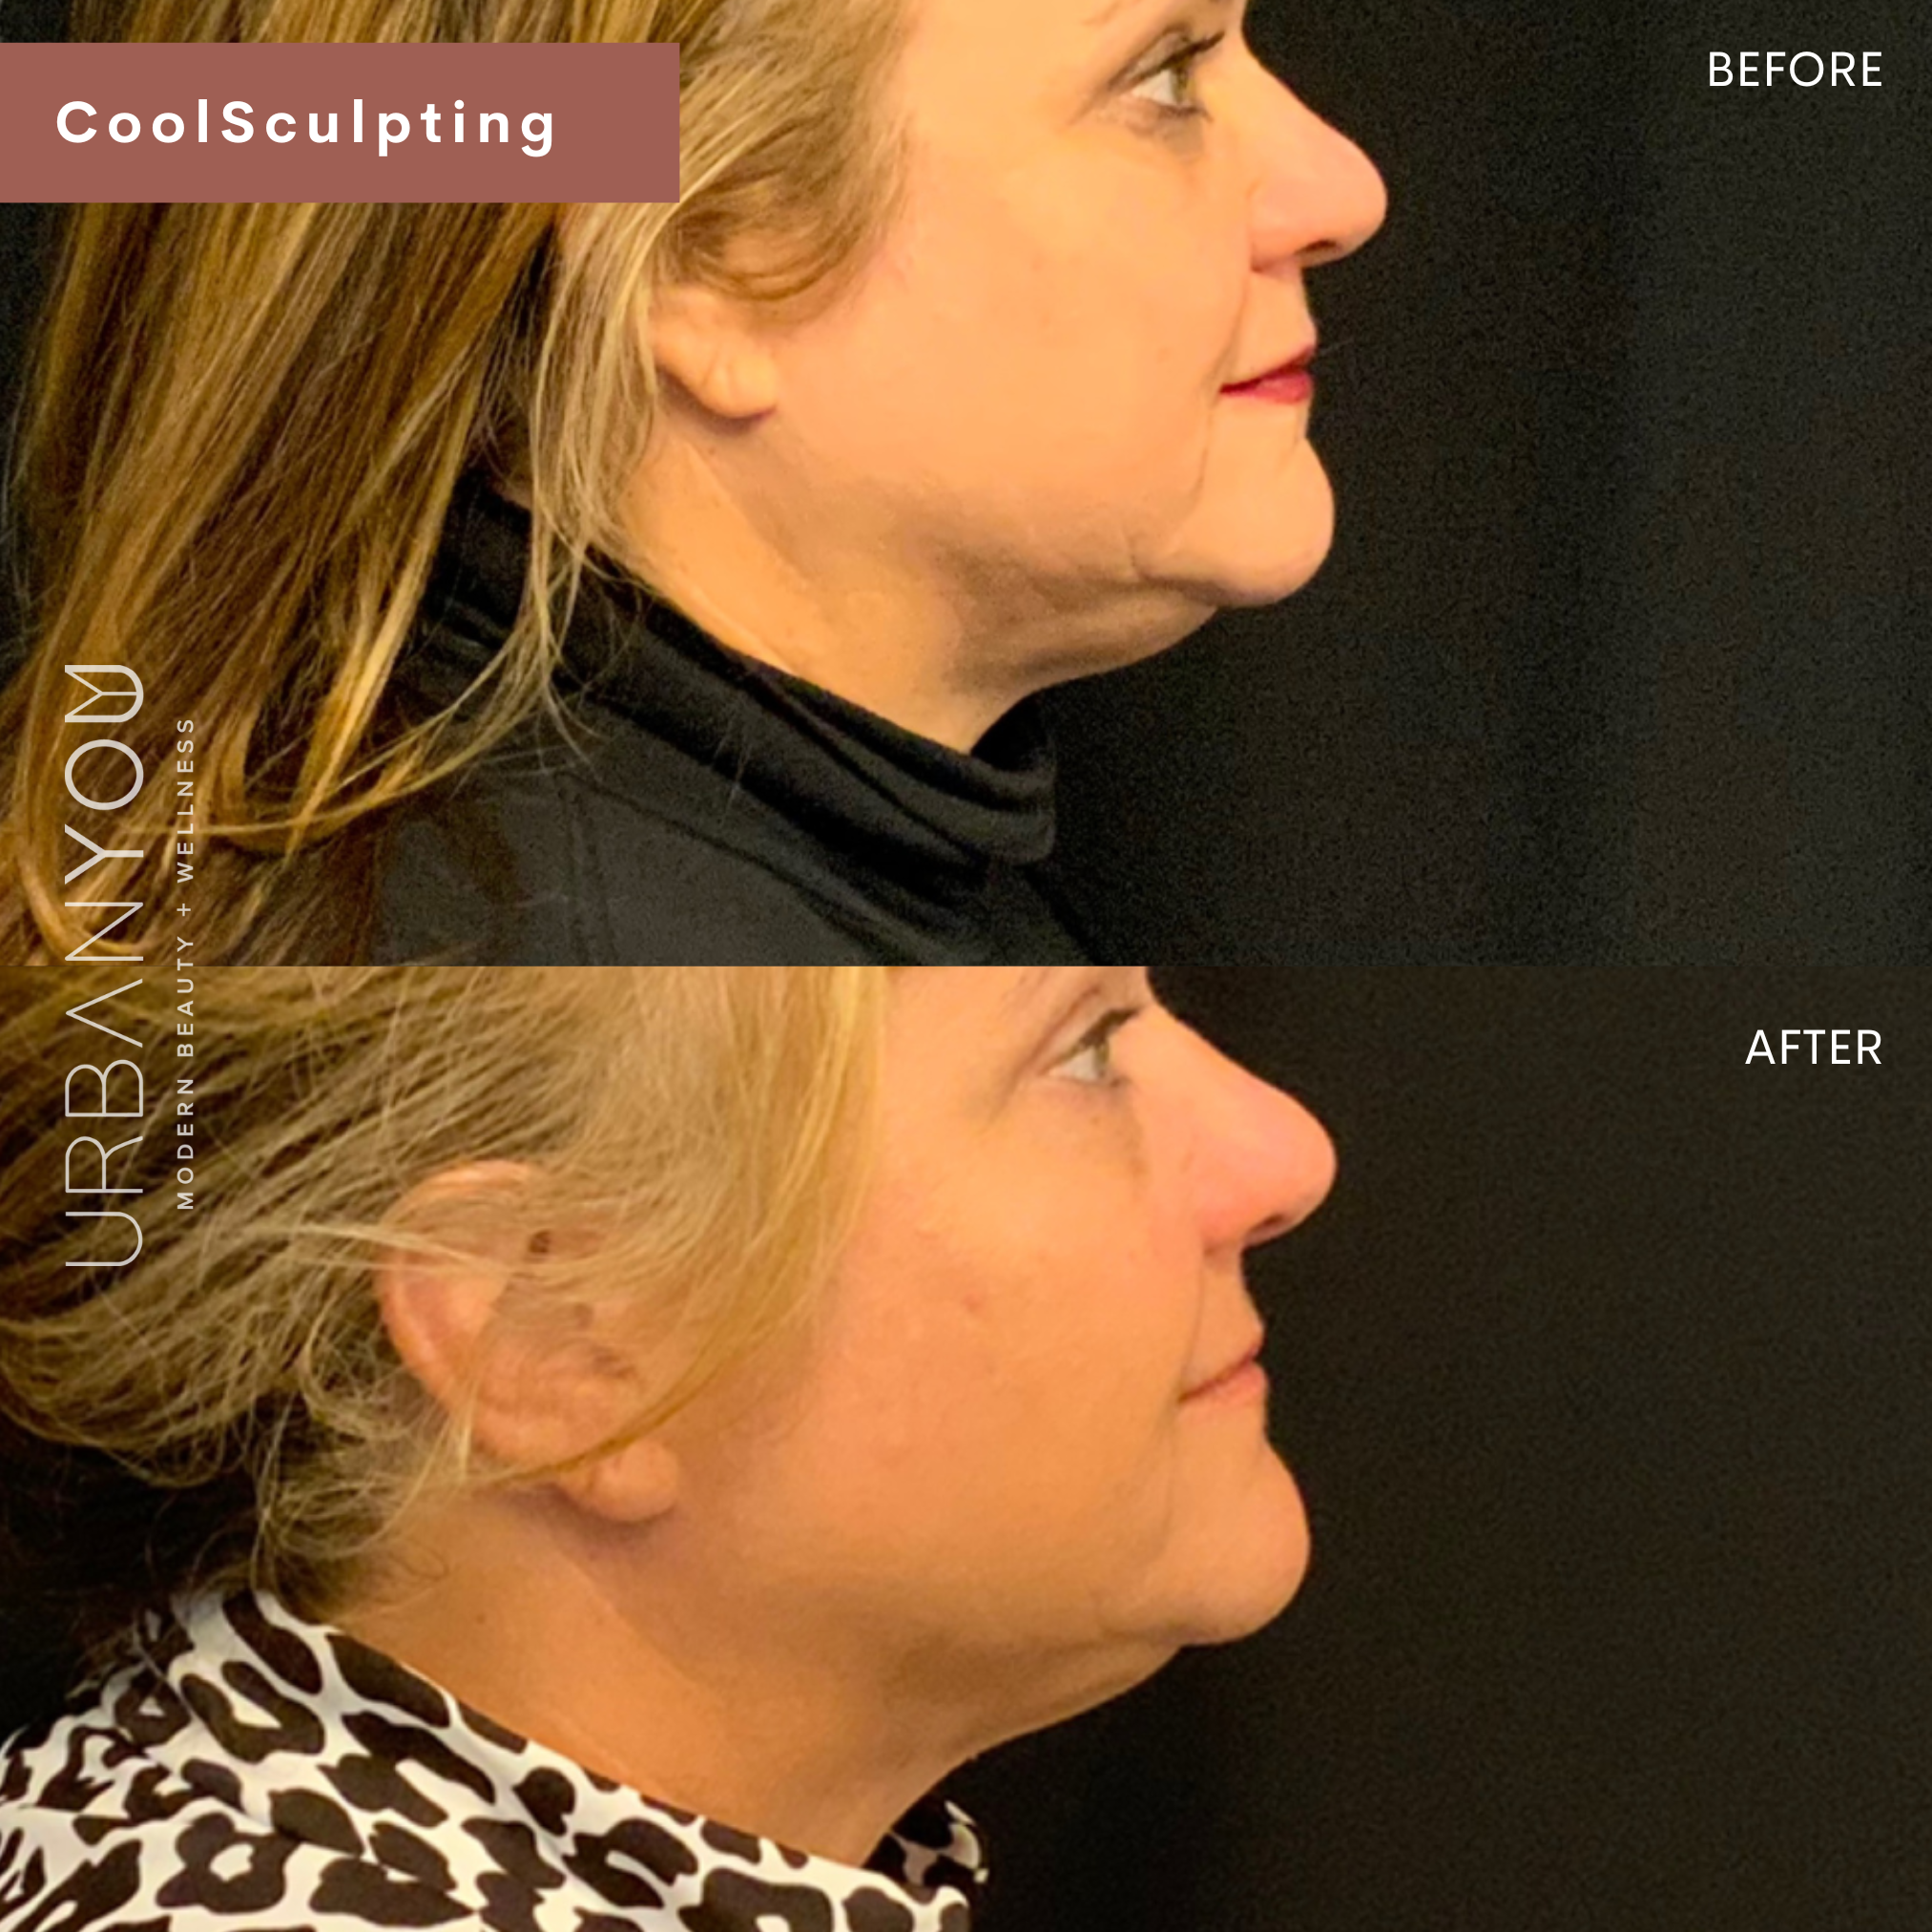 CoolSculpting Before and After Photos at Urban You Medical Spa in Grand Rapids and Northville, Michigan